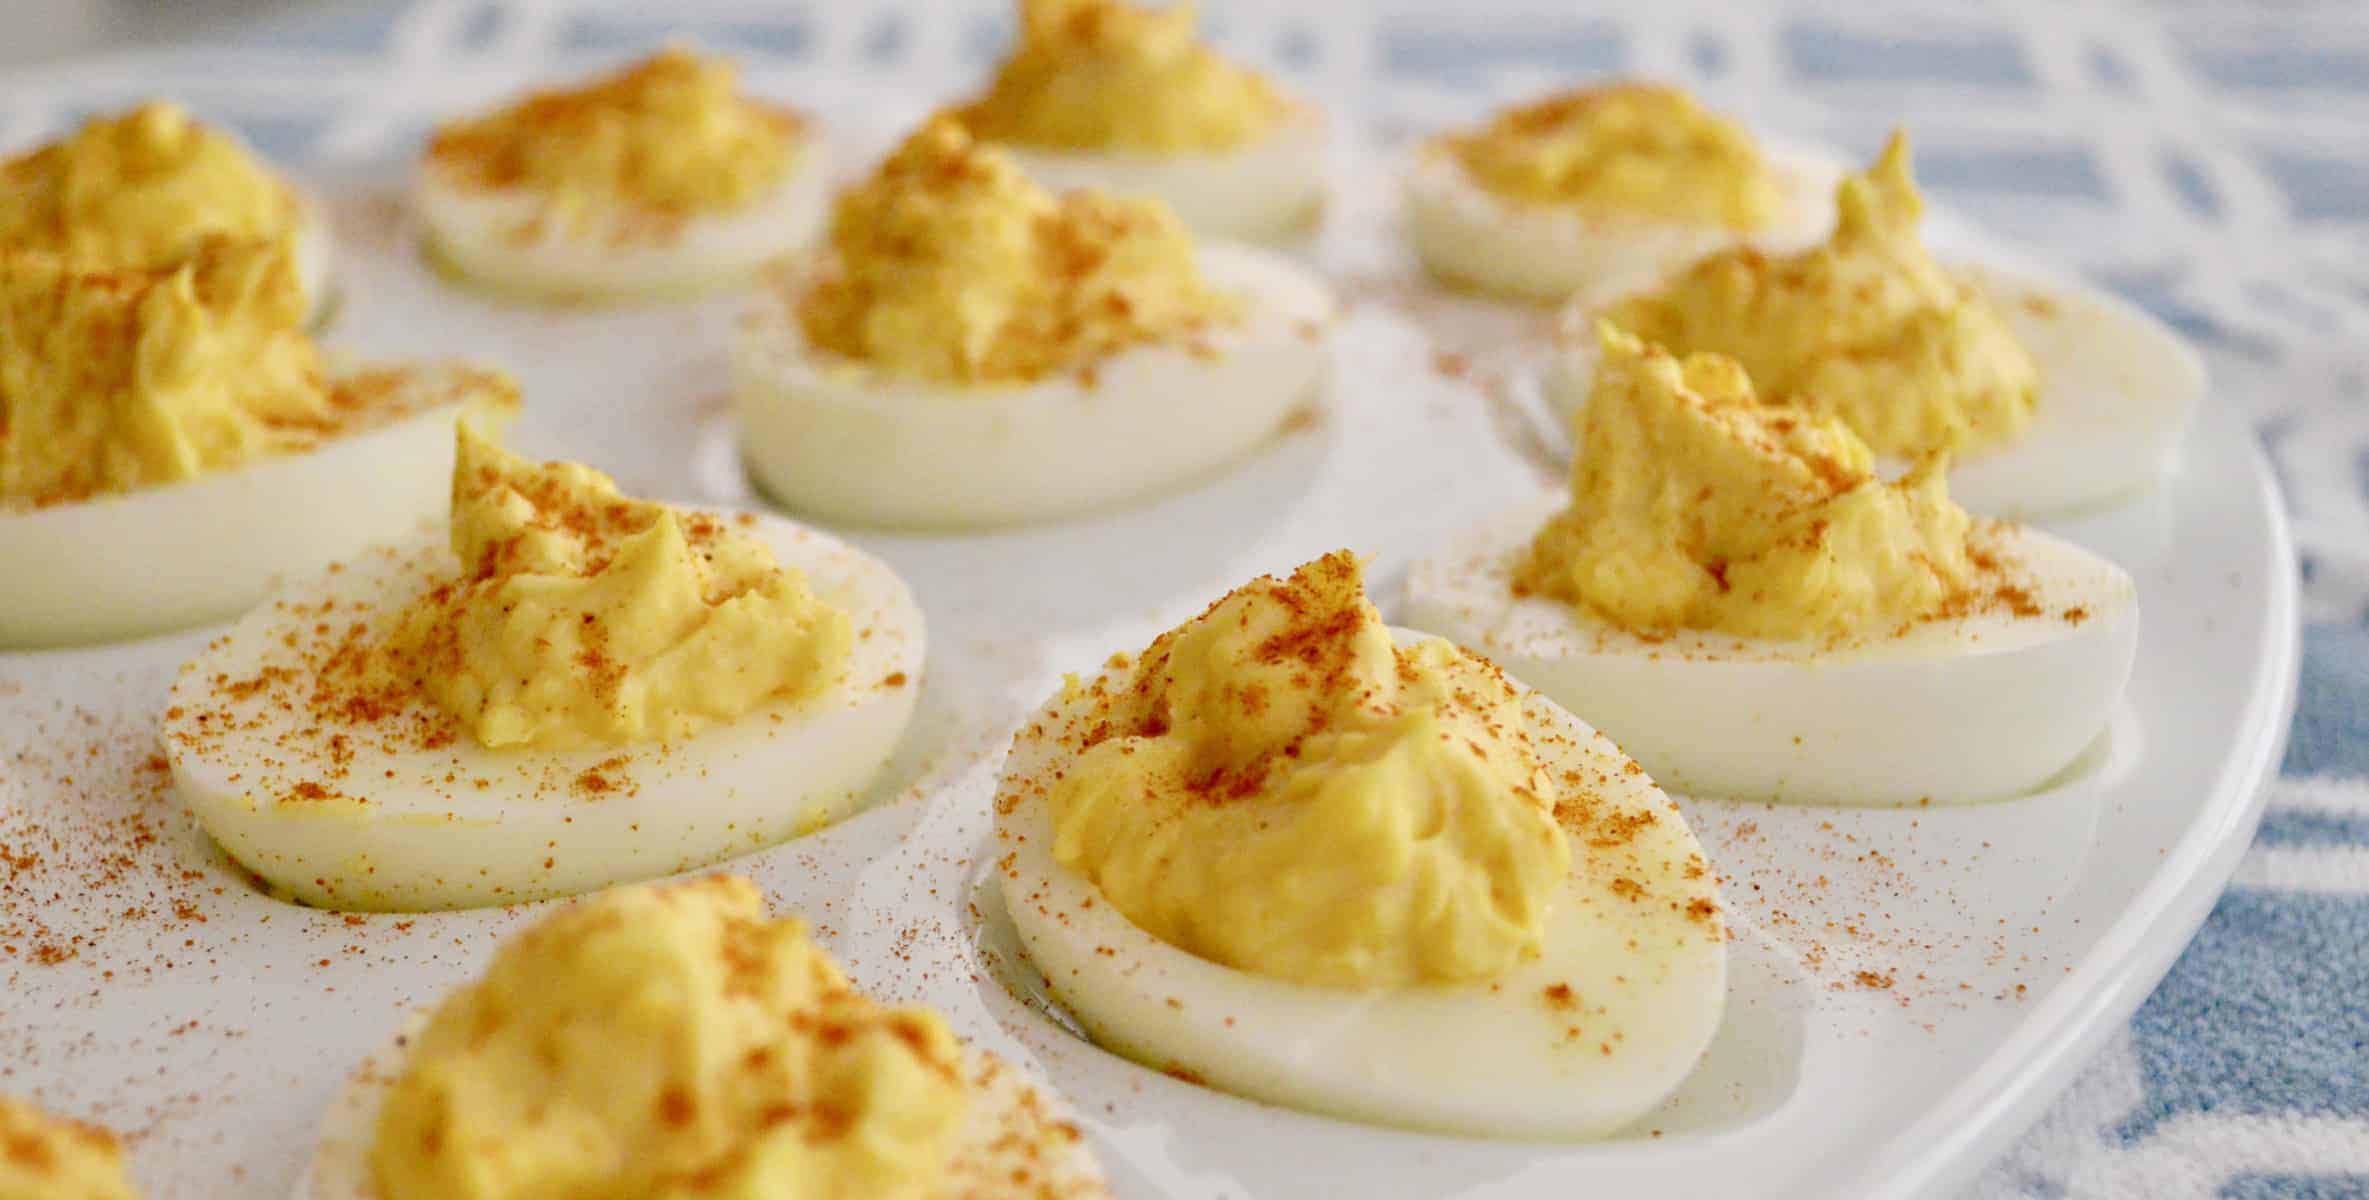 Easy Deviled Eggs are the best classic recipe that is easy and healthy. This budget-friendly appetizer is delicious and so easy. #deviledeggs #eggs #appetizer #brunch #breakfast #babyshower #bridalshower #budget #holidays #easter #christmas #best #classic #easyrecipe